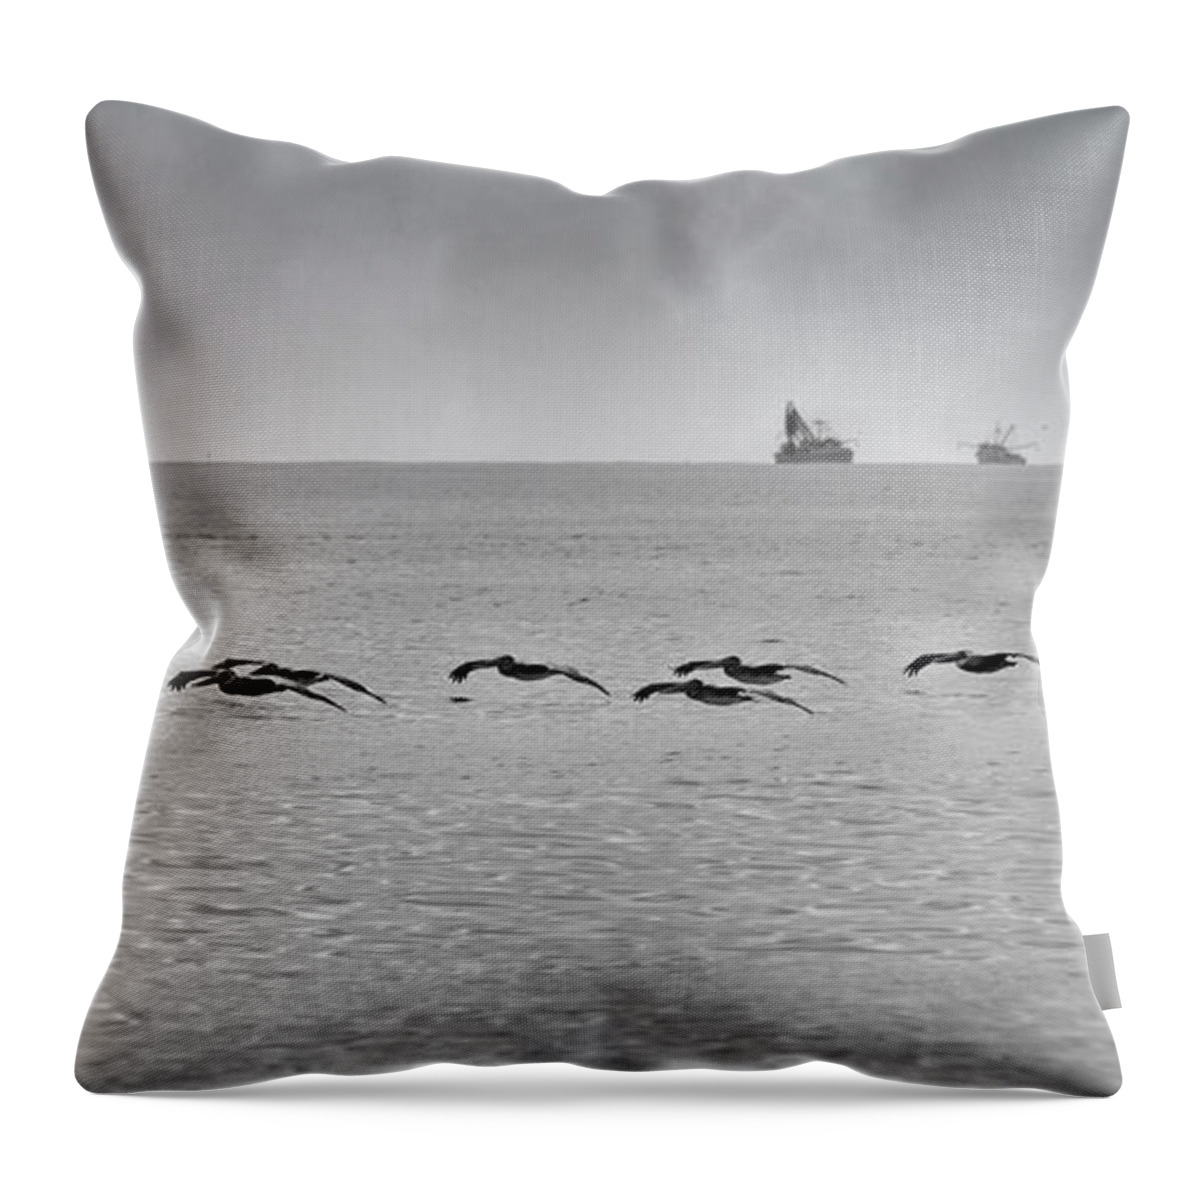 Pelican Throw Pillow featuring the photograph Destination by Betsy Knapp